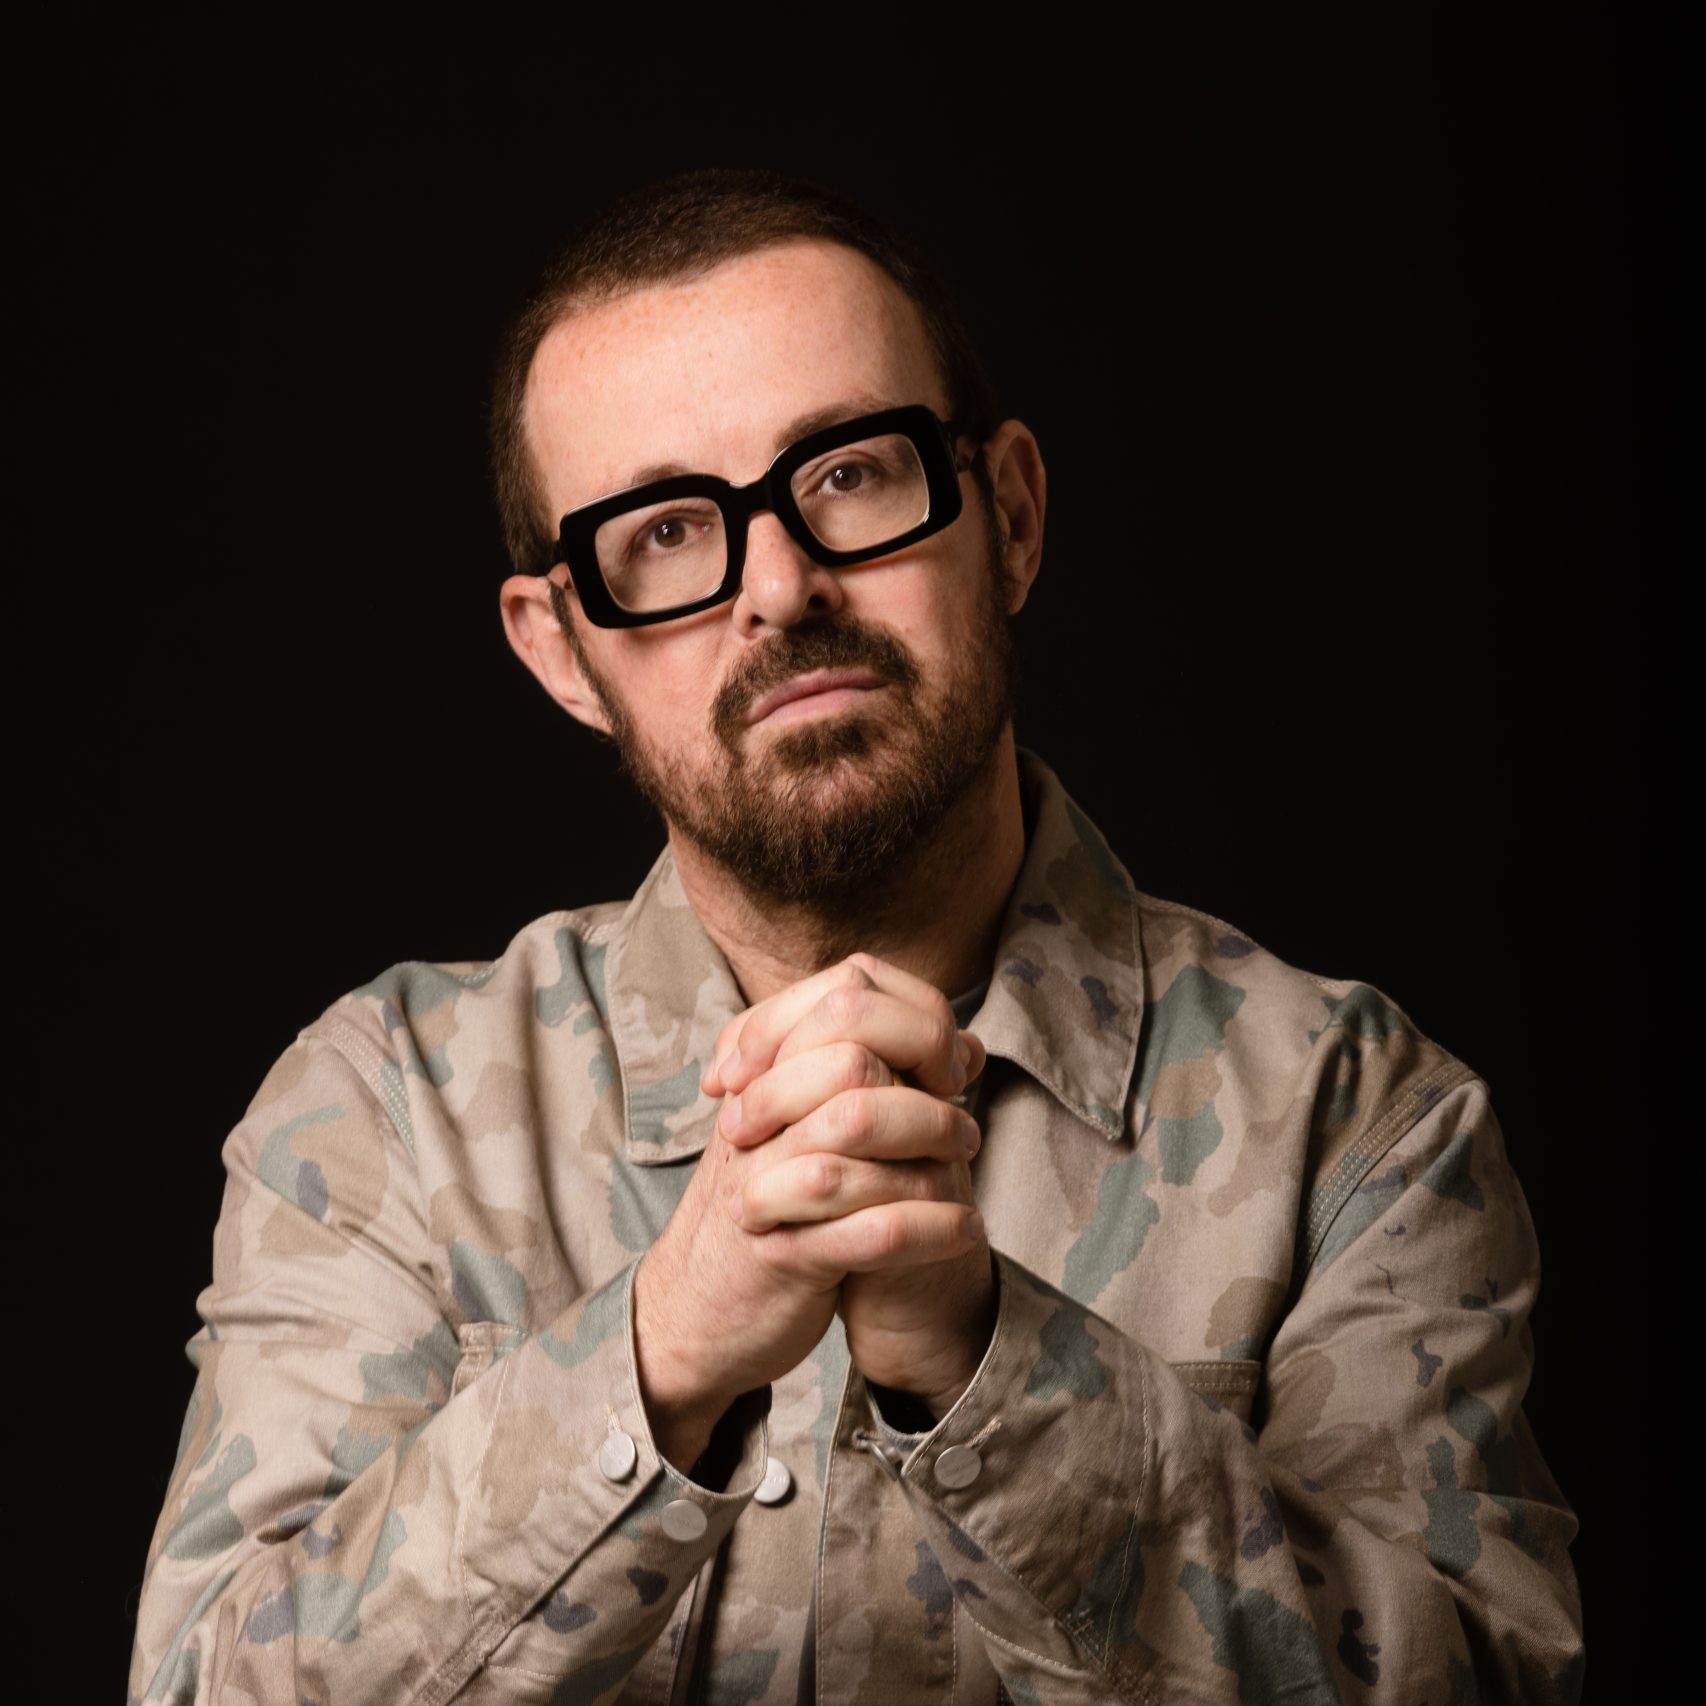 A photo of DJ Judge Jules. He is wearing a camouflage jacket with his hands clasped together. He has chunky black glasses on. The photo is taken against a plain black background. 